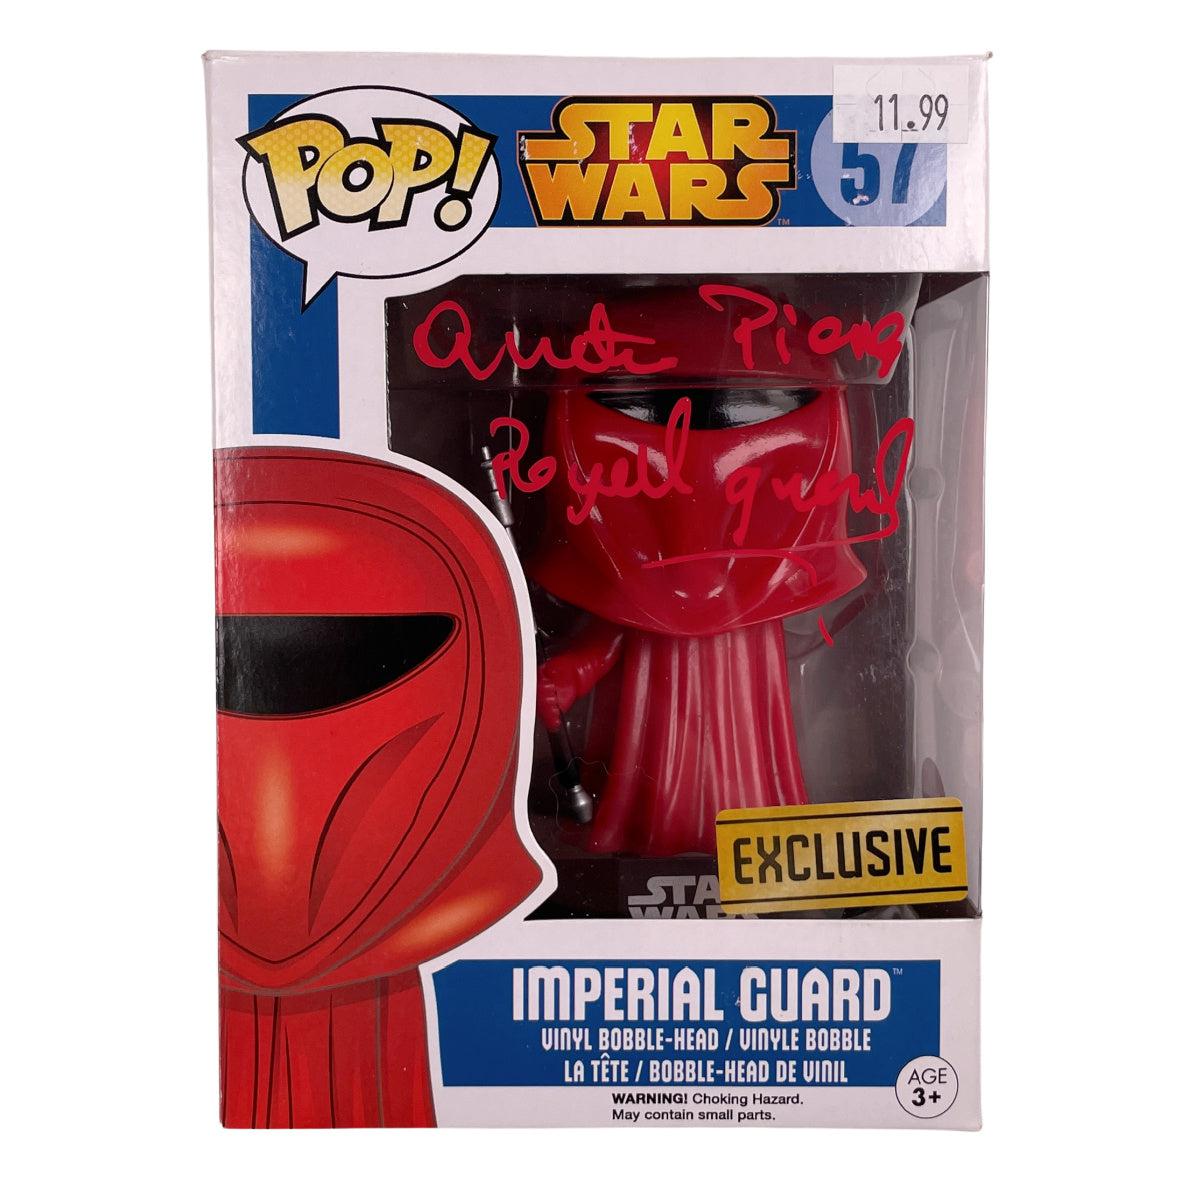 QUENTIN PIERRE SIGNED FUNKO POP Imperial Guard #57 AUTOGRAPHED BAS COA